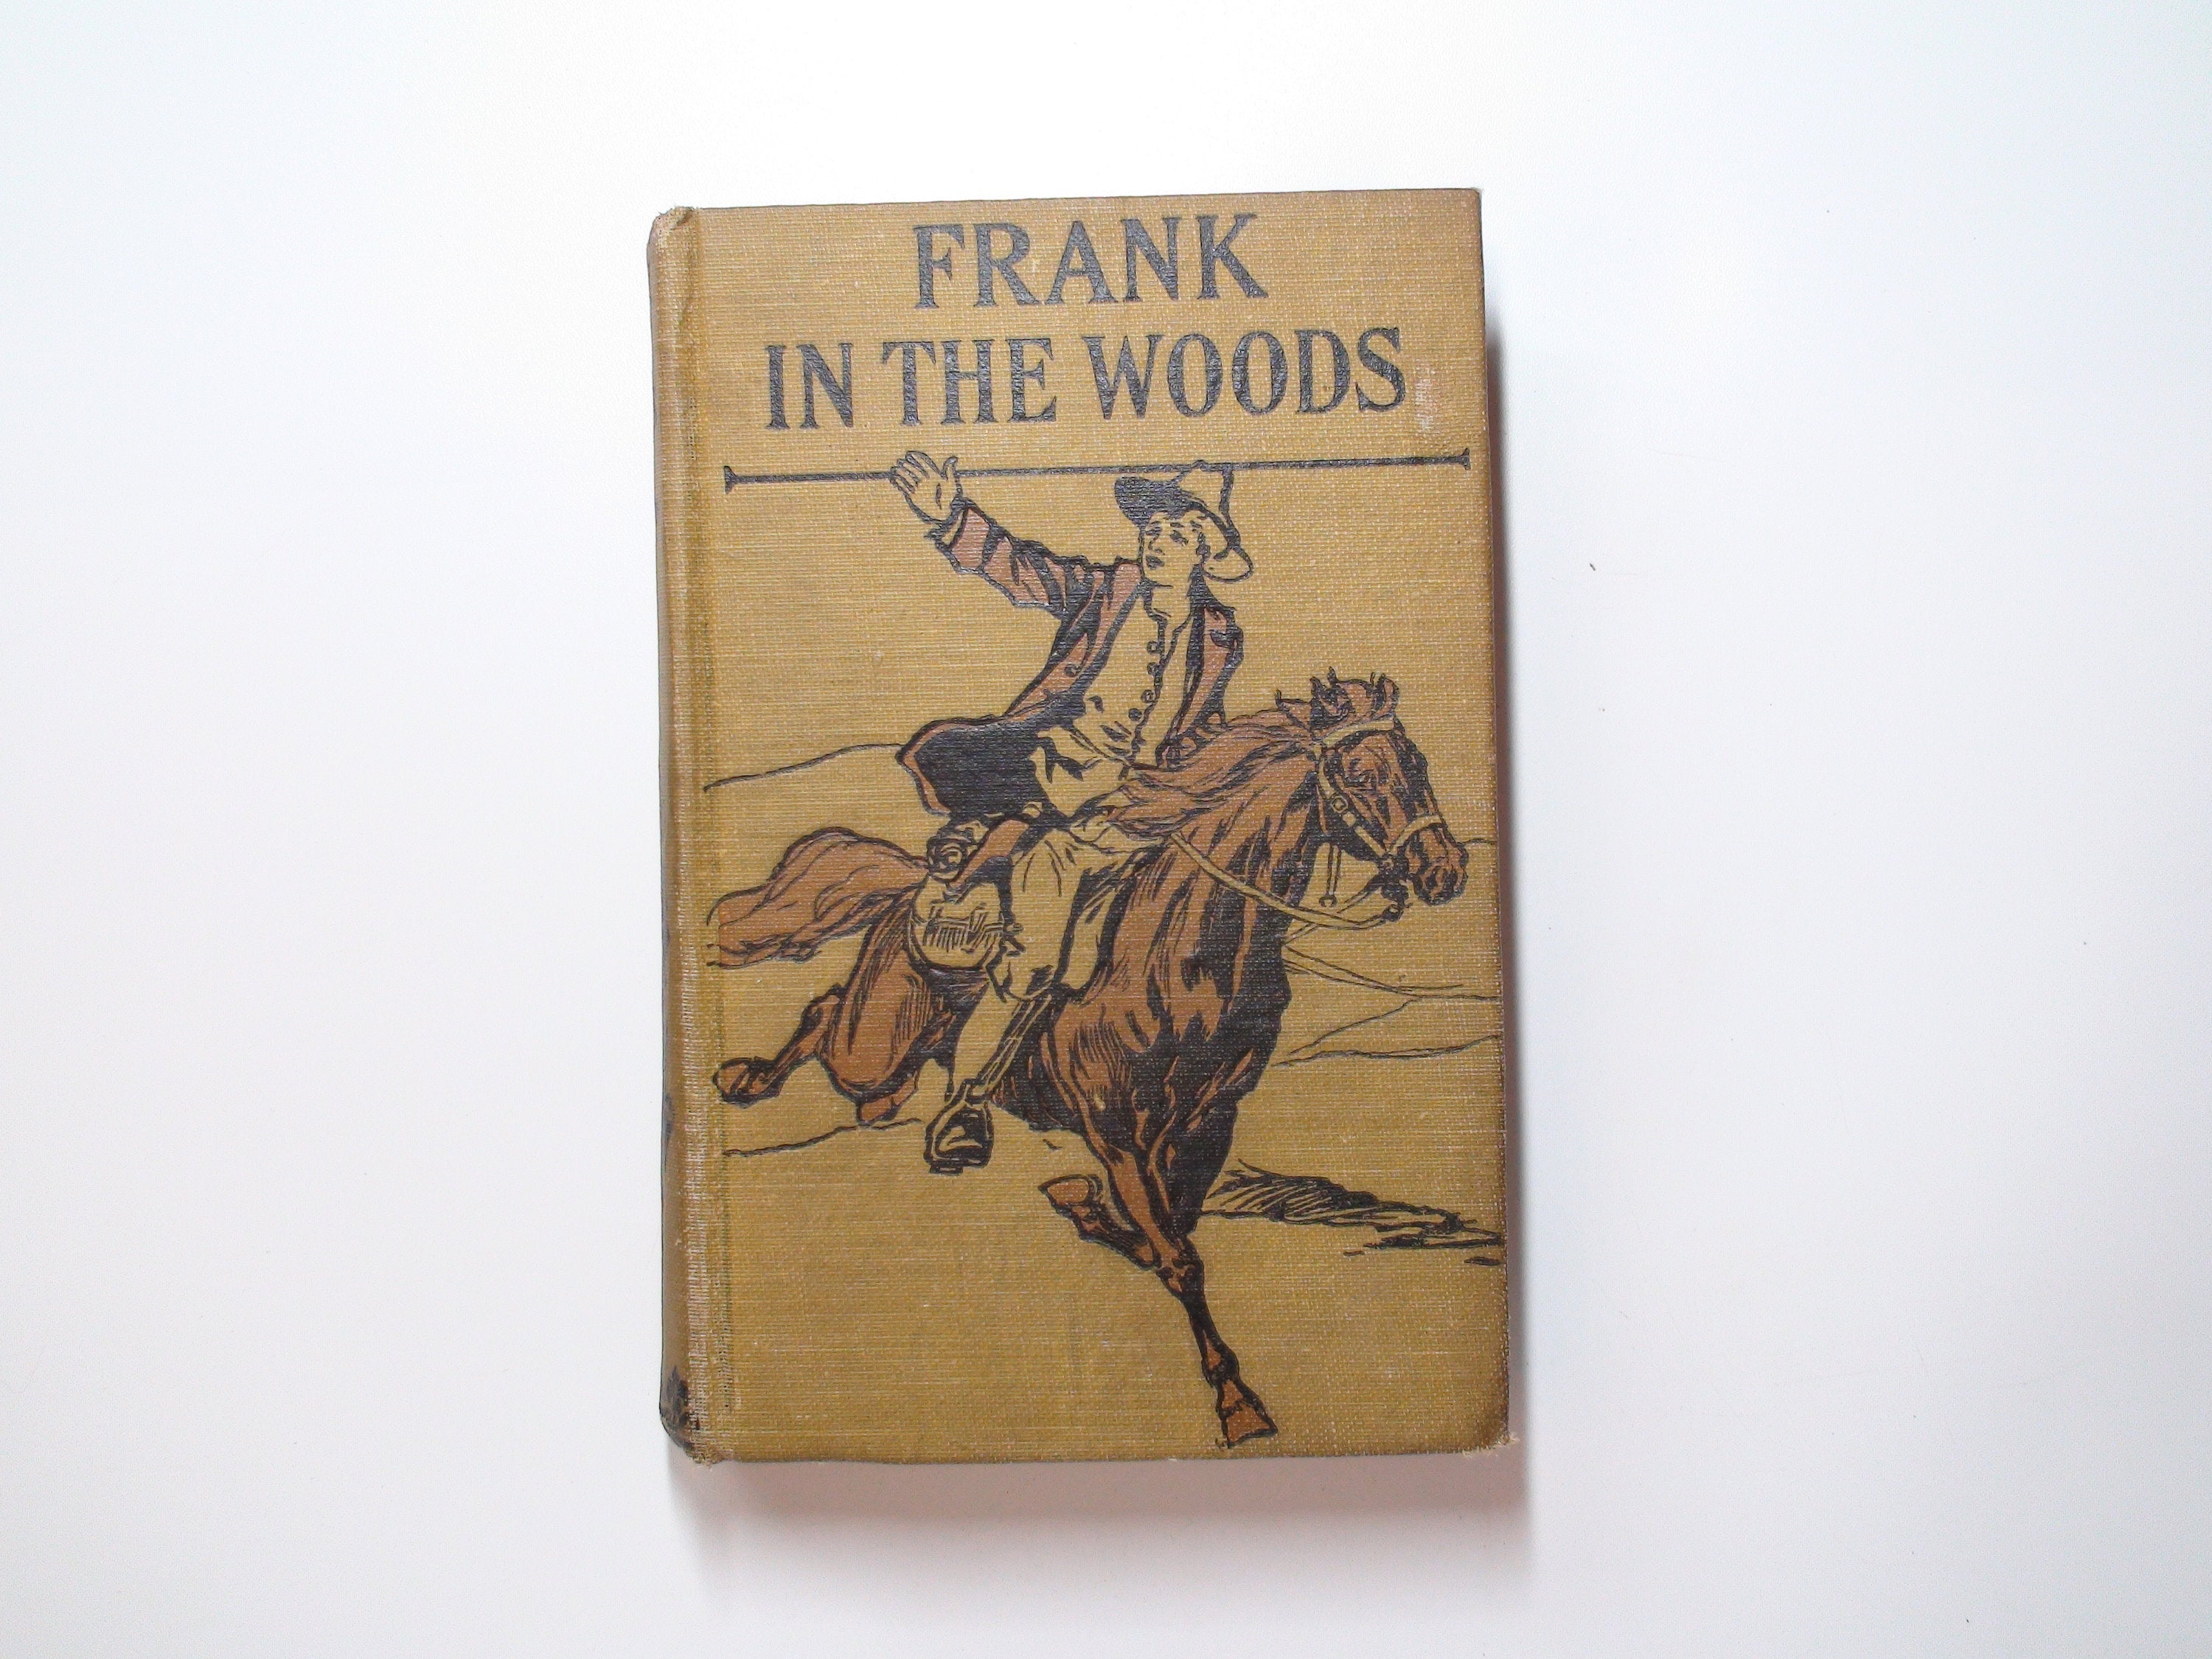 Frank In the Woods, Frank and Archie Series, By Harry Castlemon, 1893